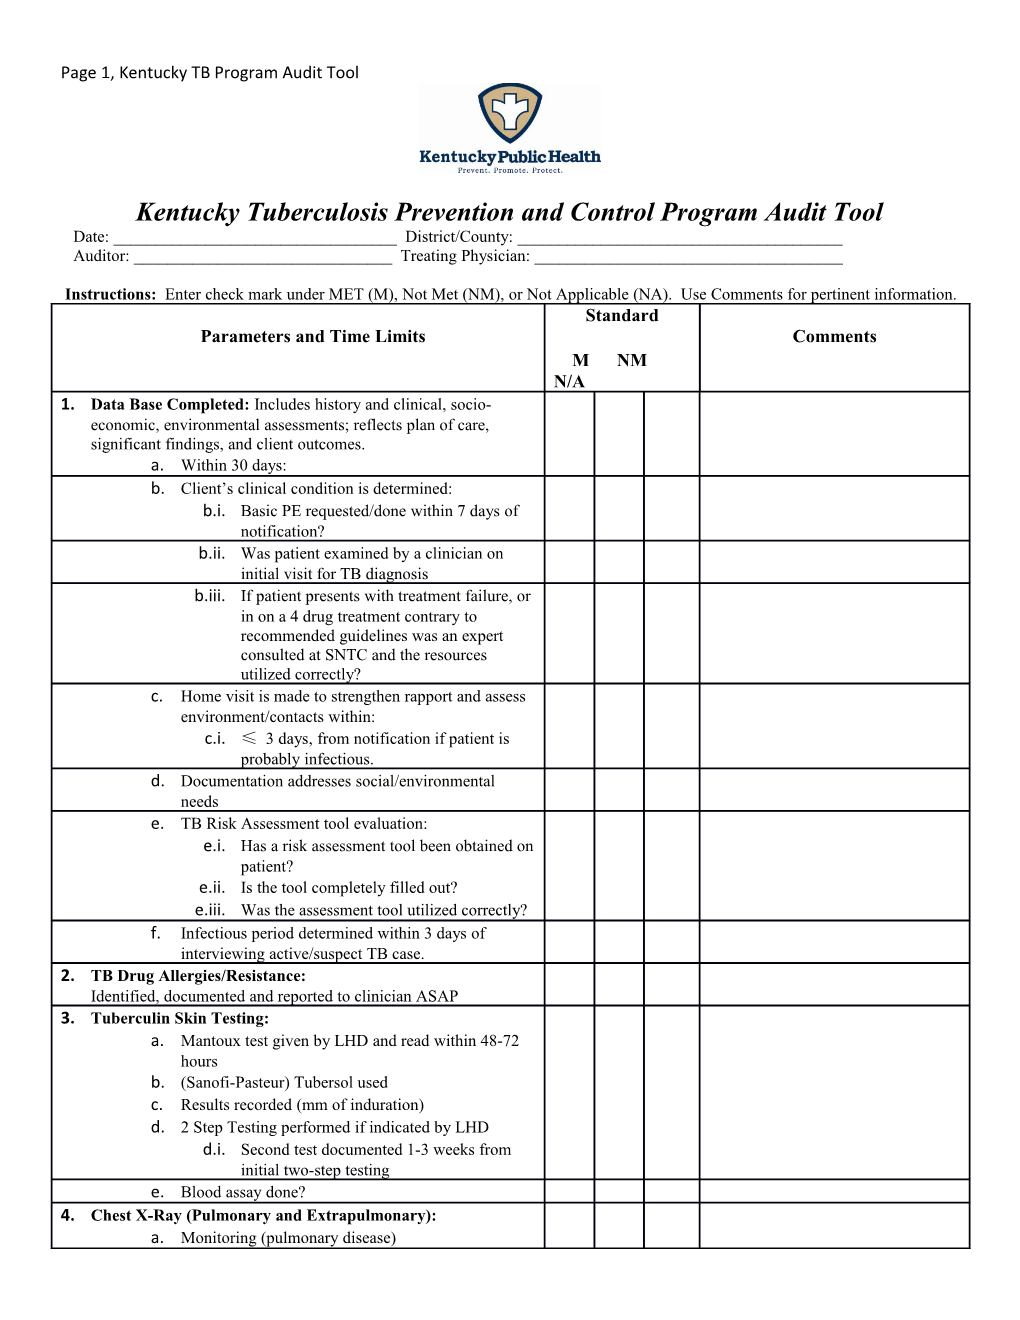 Kentucky Tuberculosis Prevention and Control Program Audit Tool